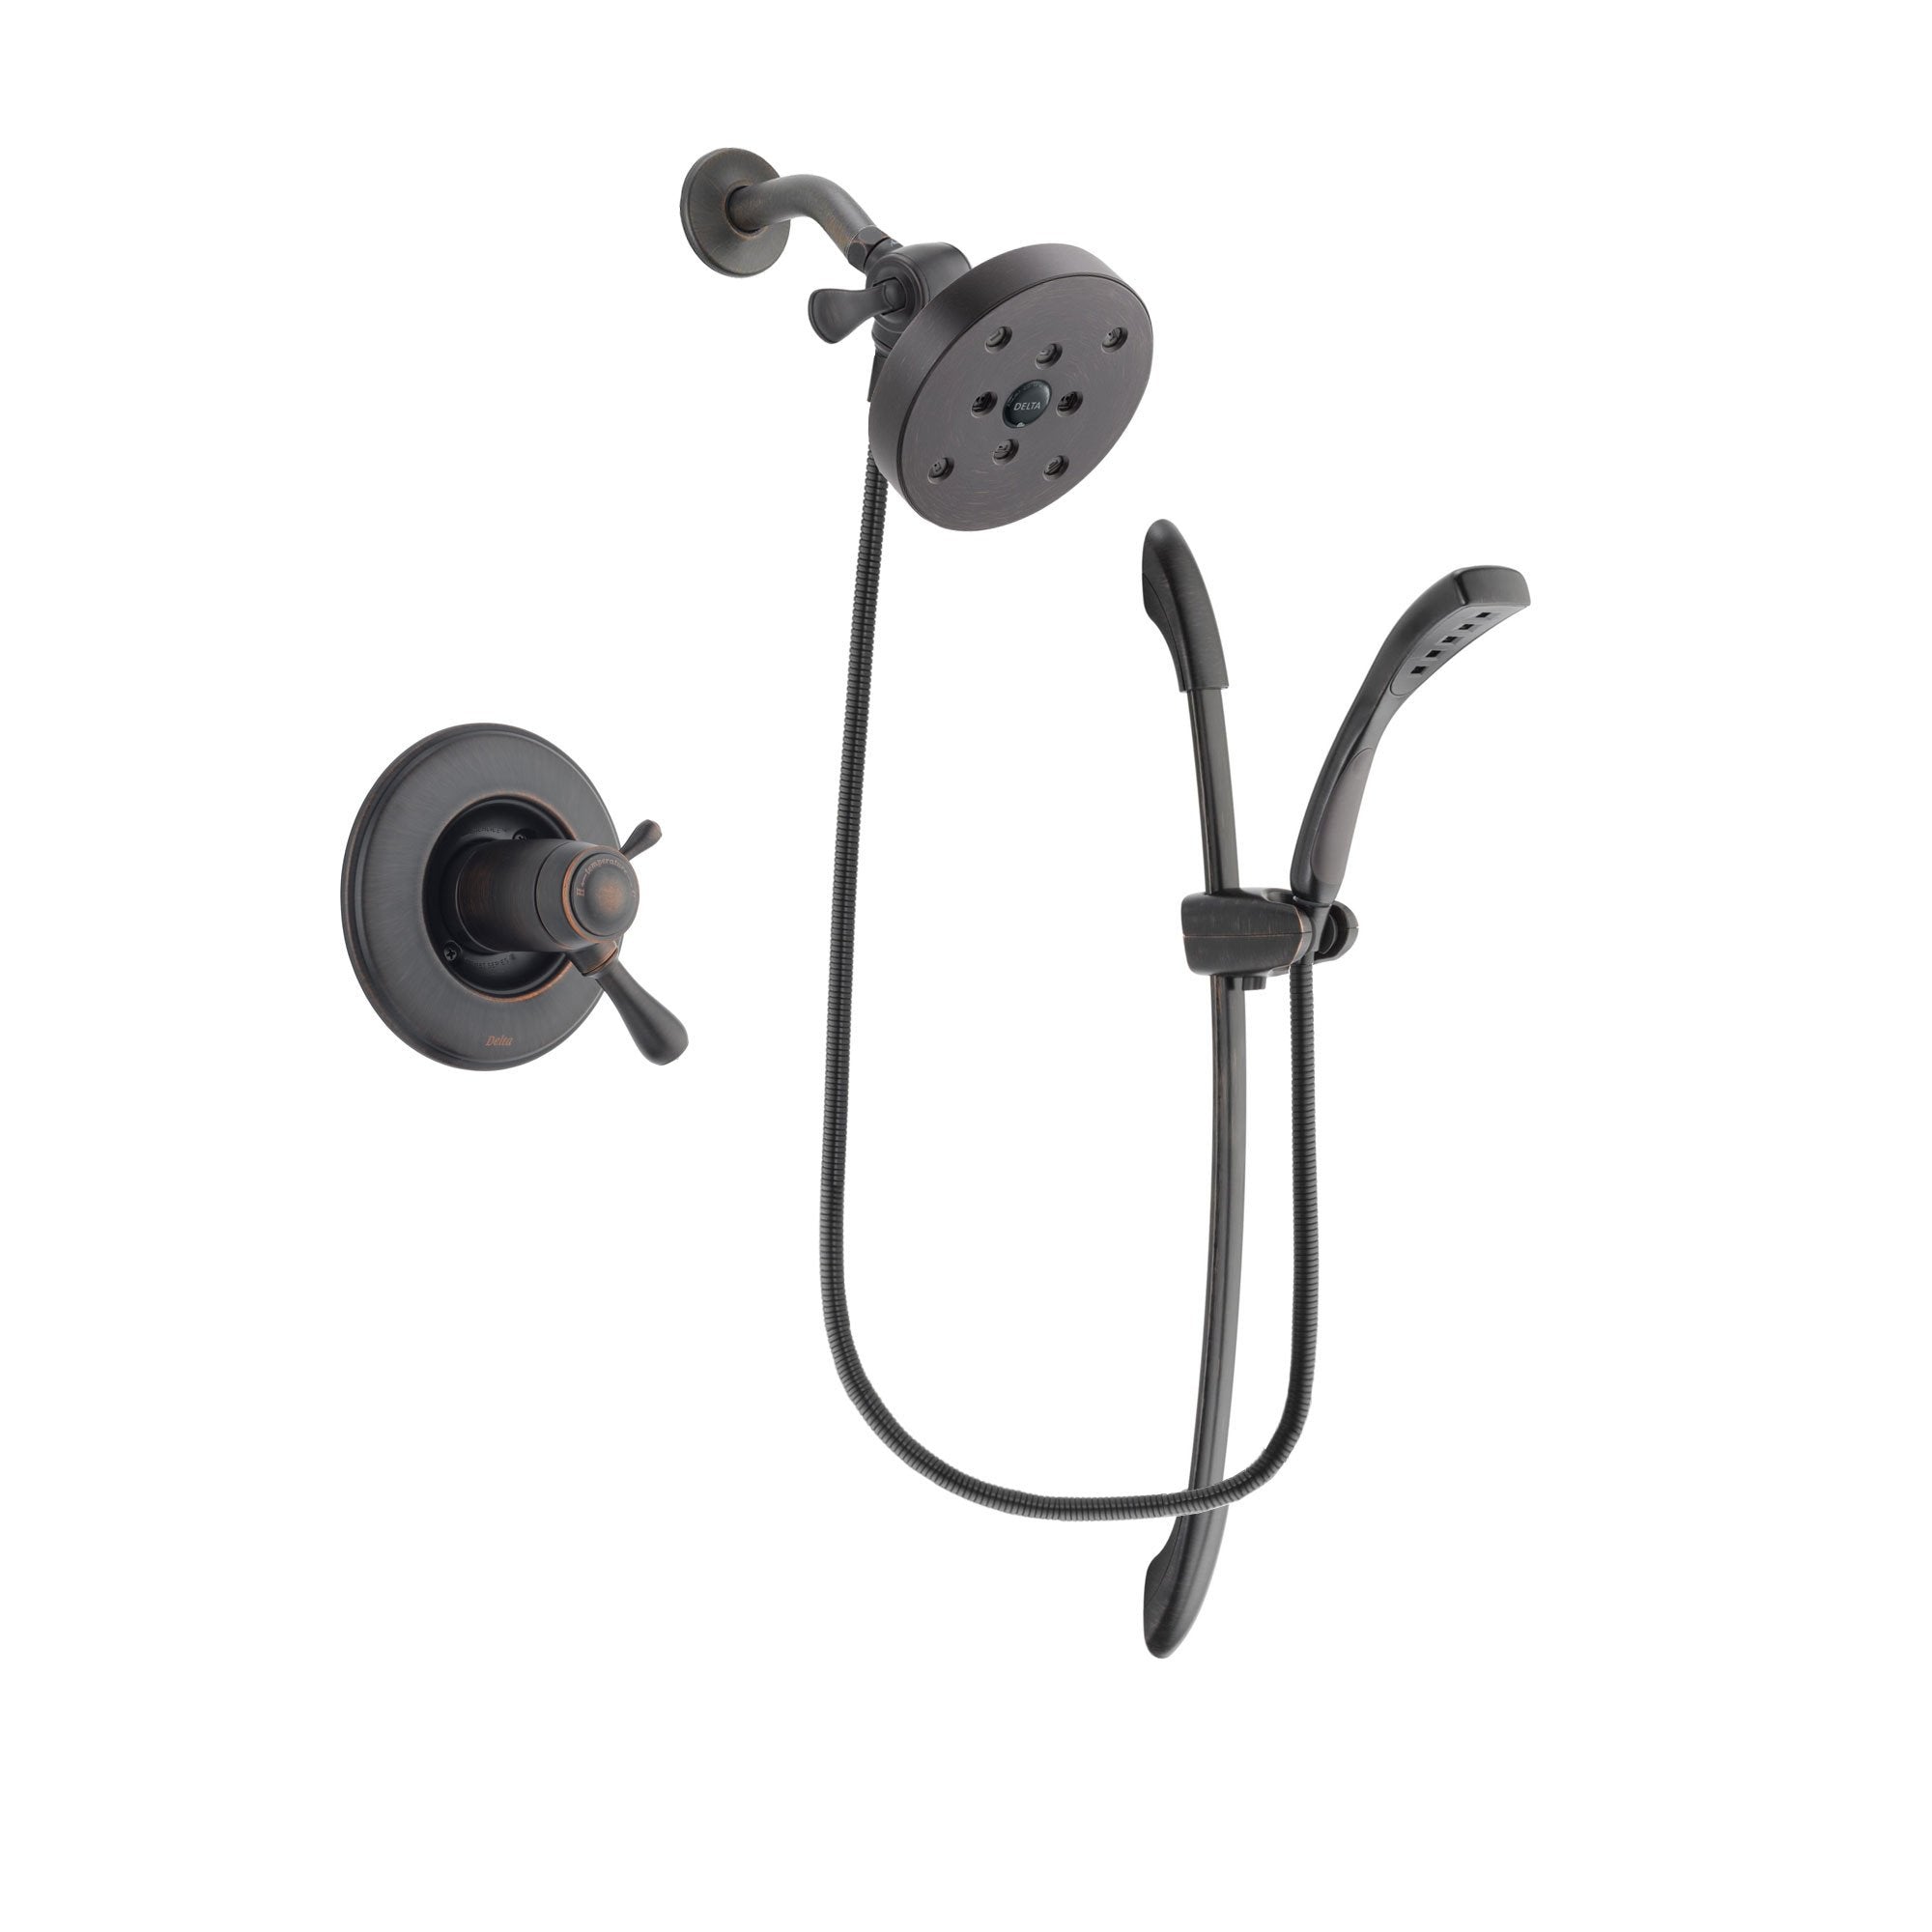 Delta Leland Venetian Bronze Finish Thermostatic Shower Faucet System Package with 5-1/2 inch Showerhead and 1-Spray Handshower with Slide Bar Includes Rough-in Valve DSP2476V